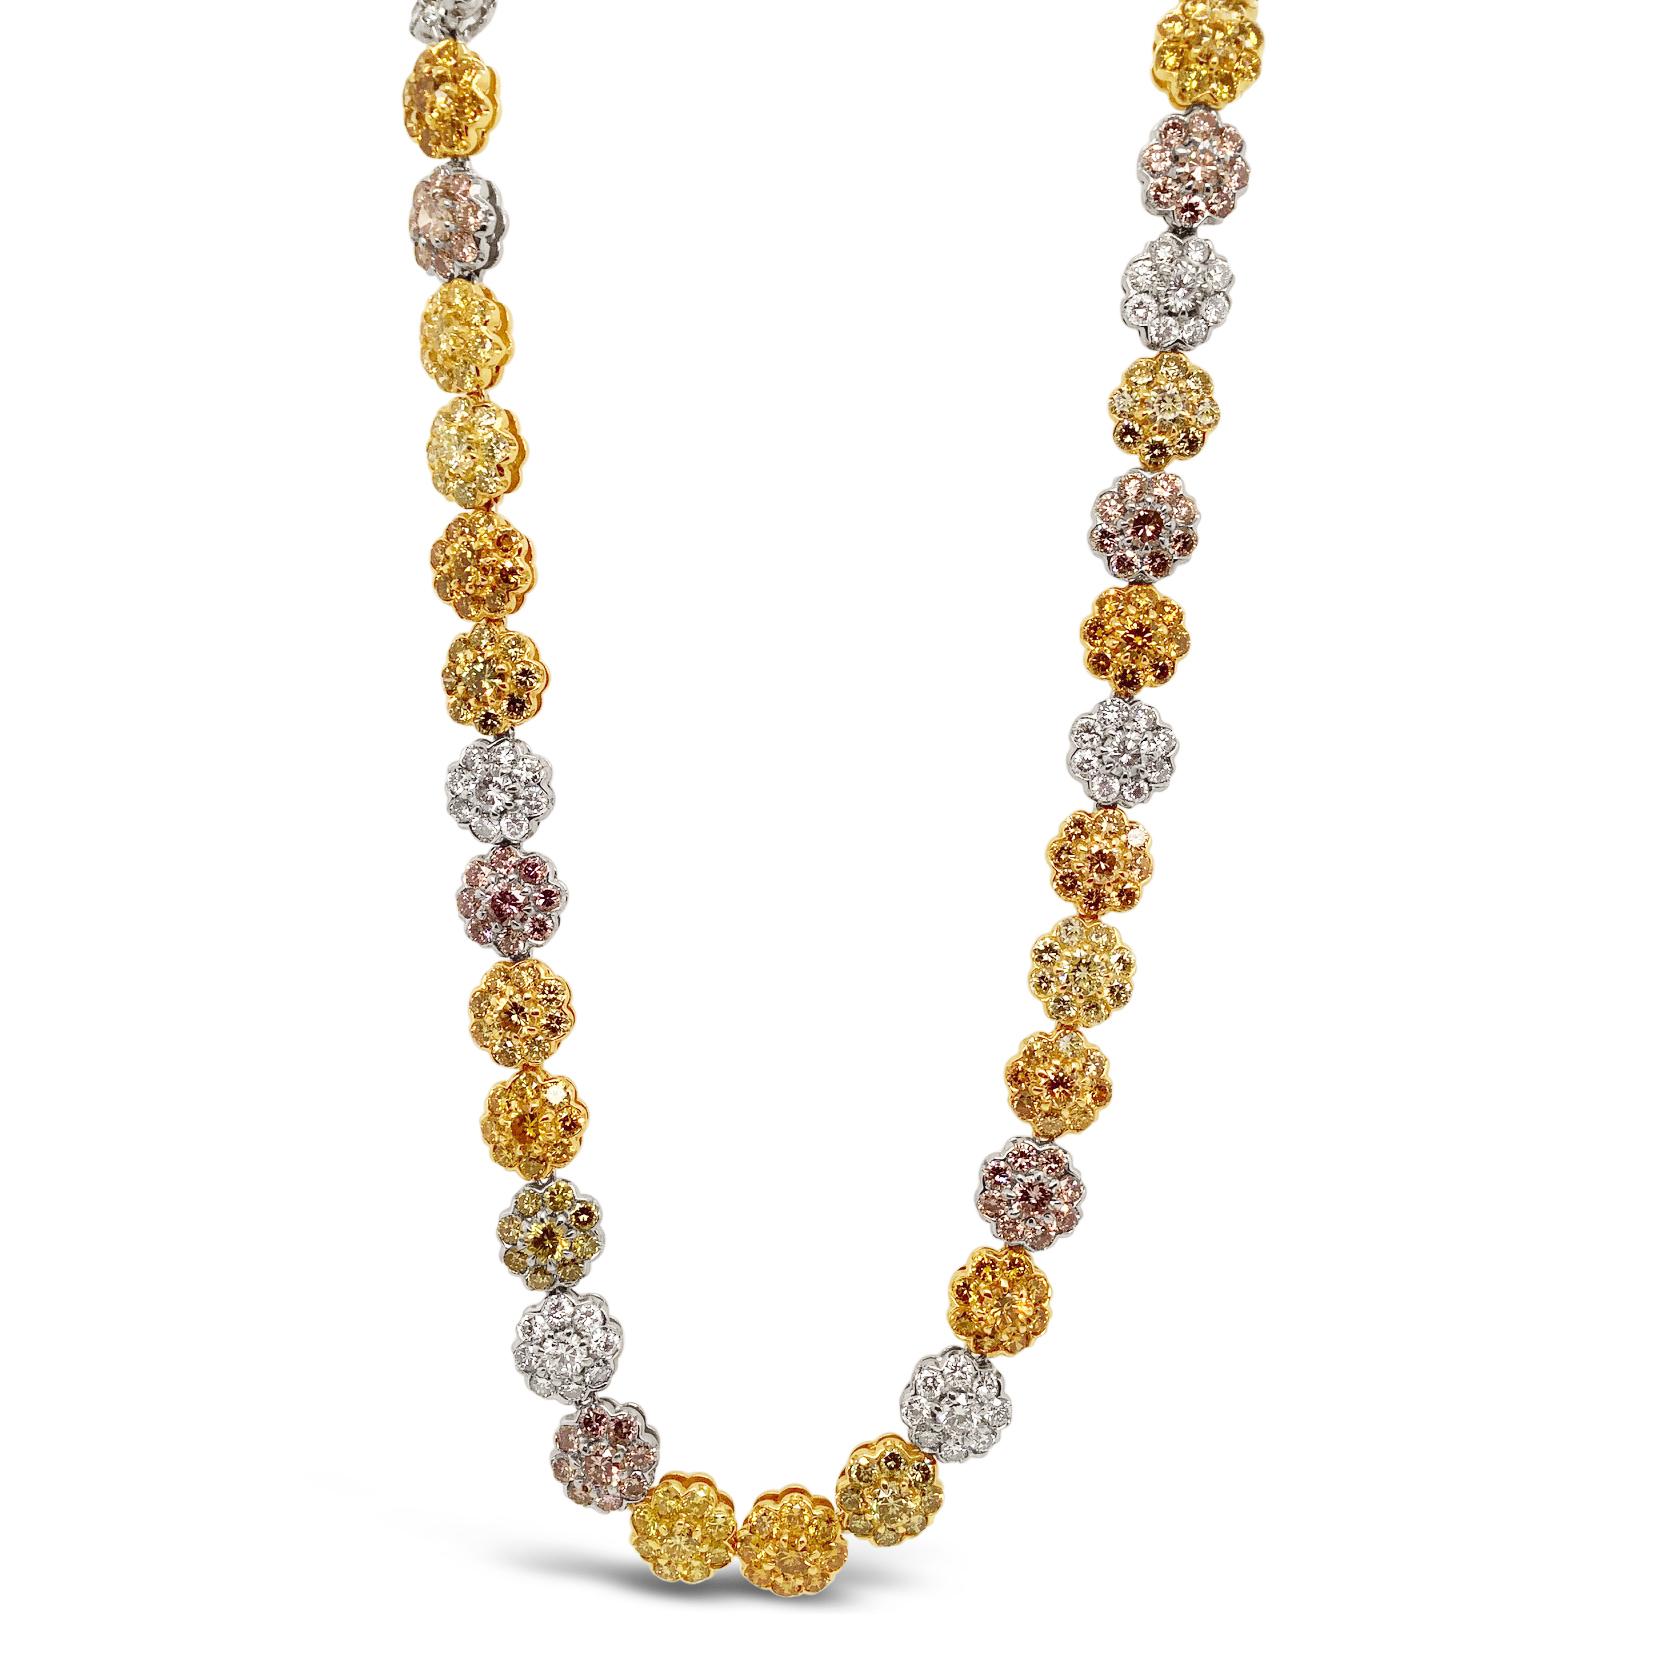 Beautiful 25.24 Carat (total weight) Natural Color Diamond Necklace in Platinum & 18K Gold.  Necklace is 16